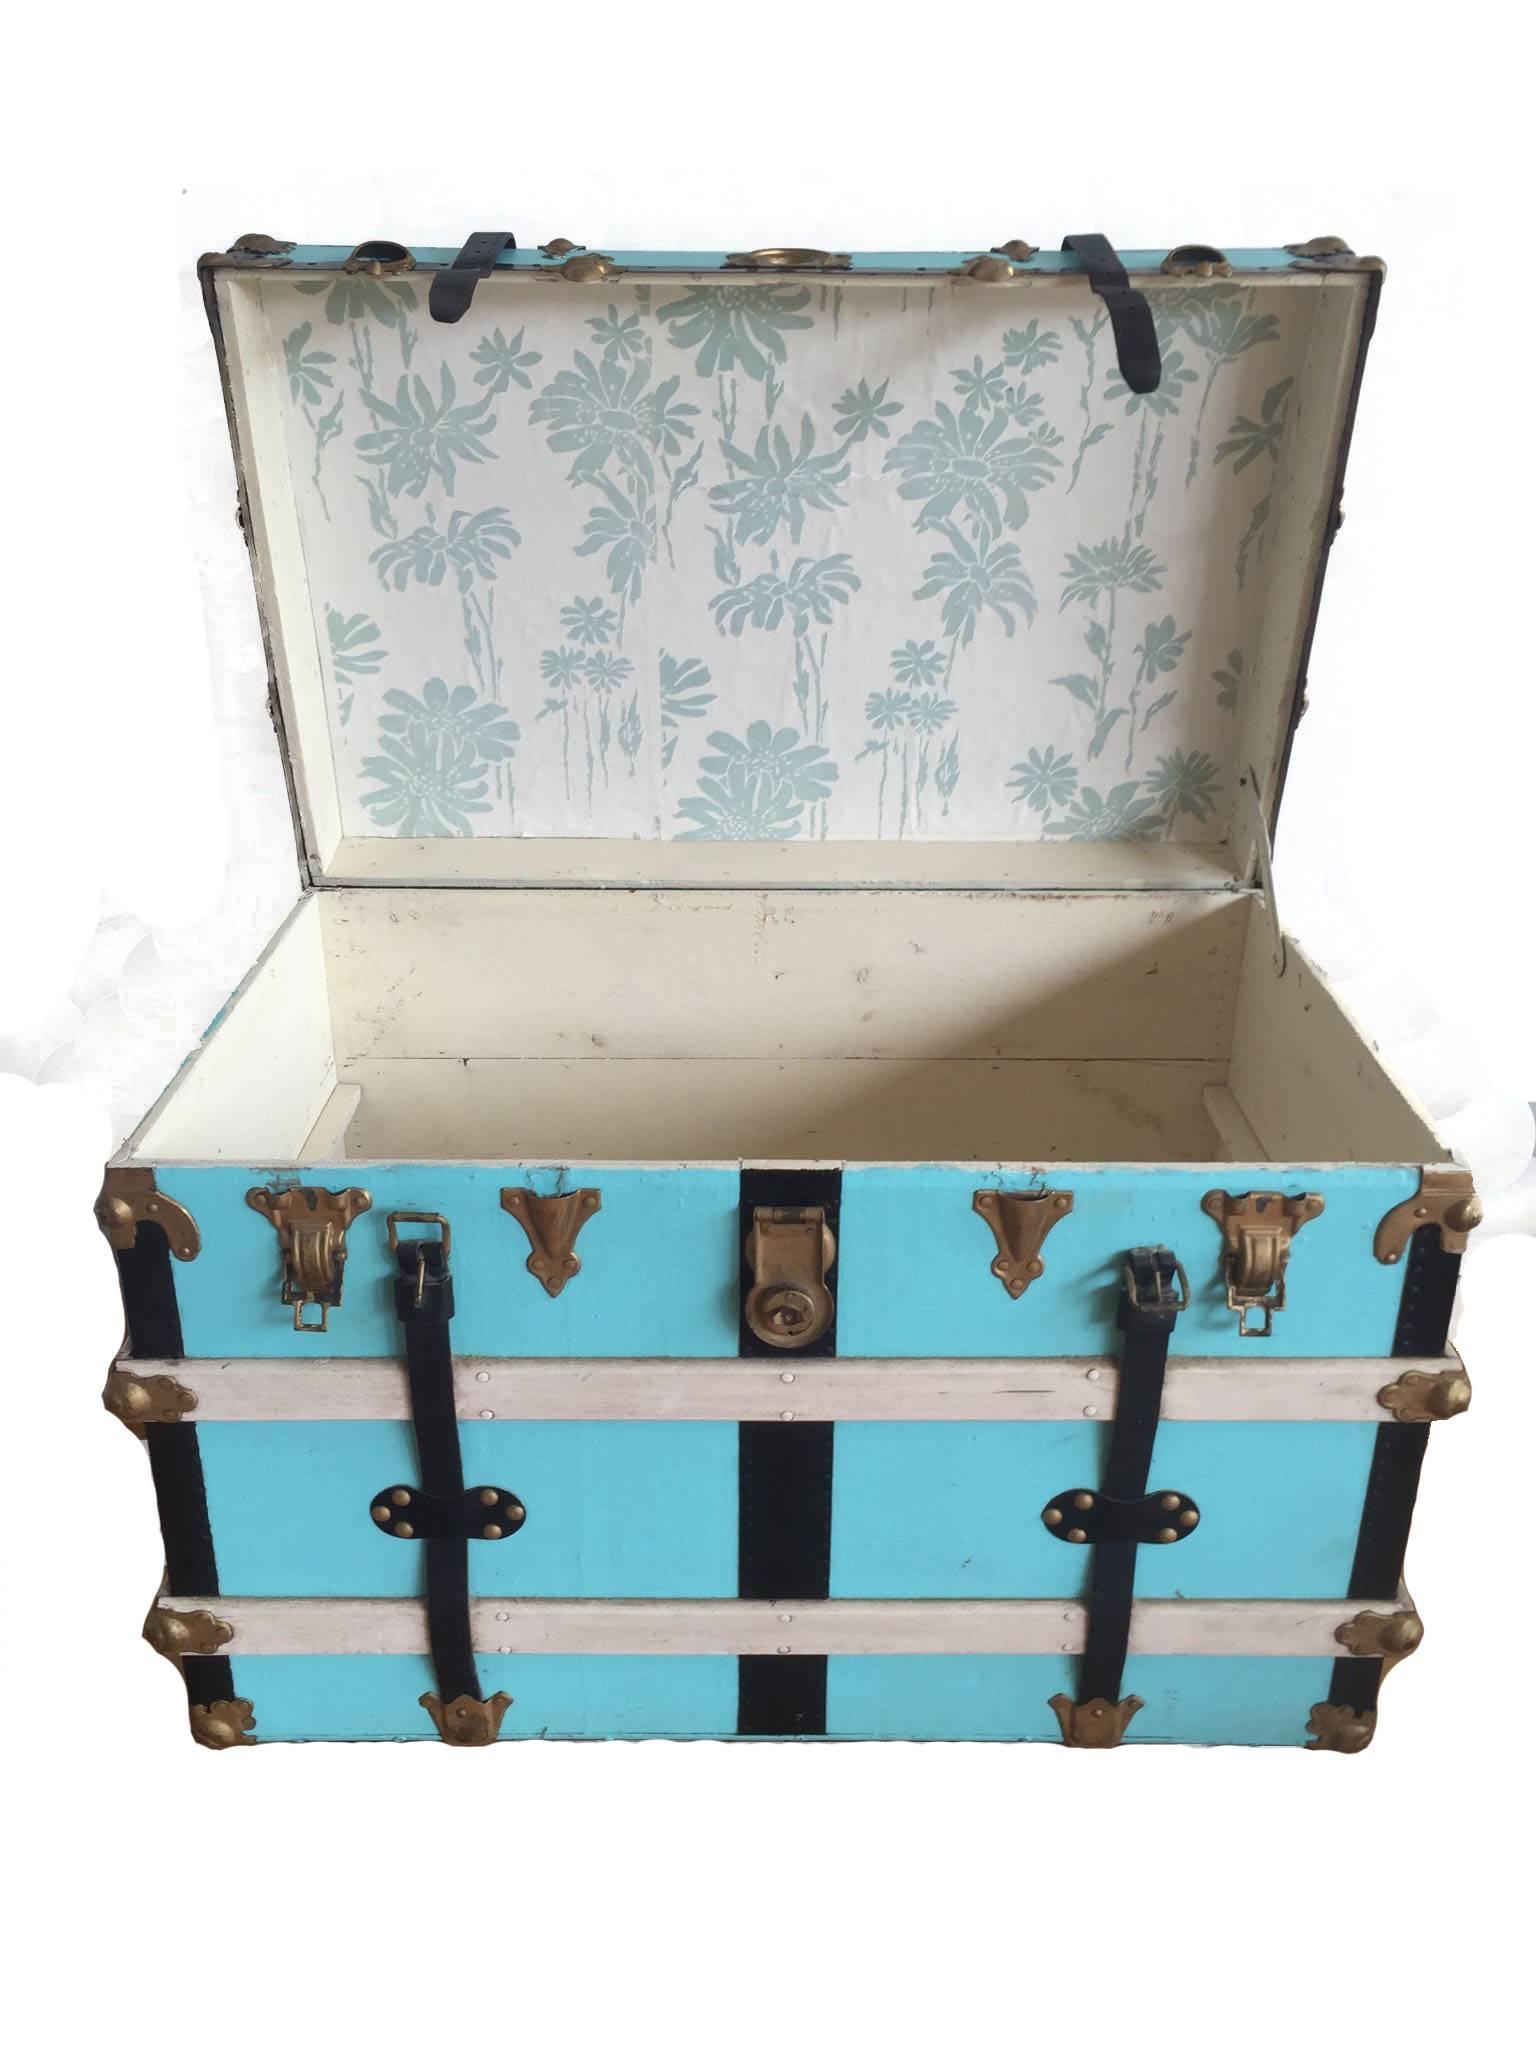 Vintage steamer trunk in leather, wood and metal.